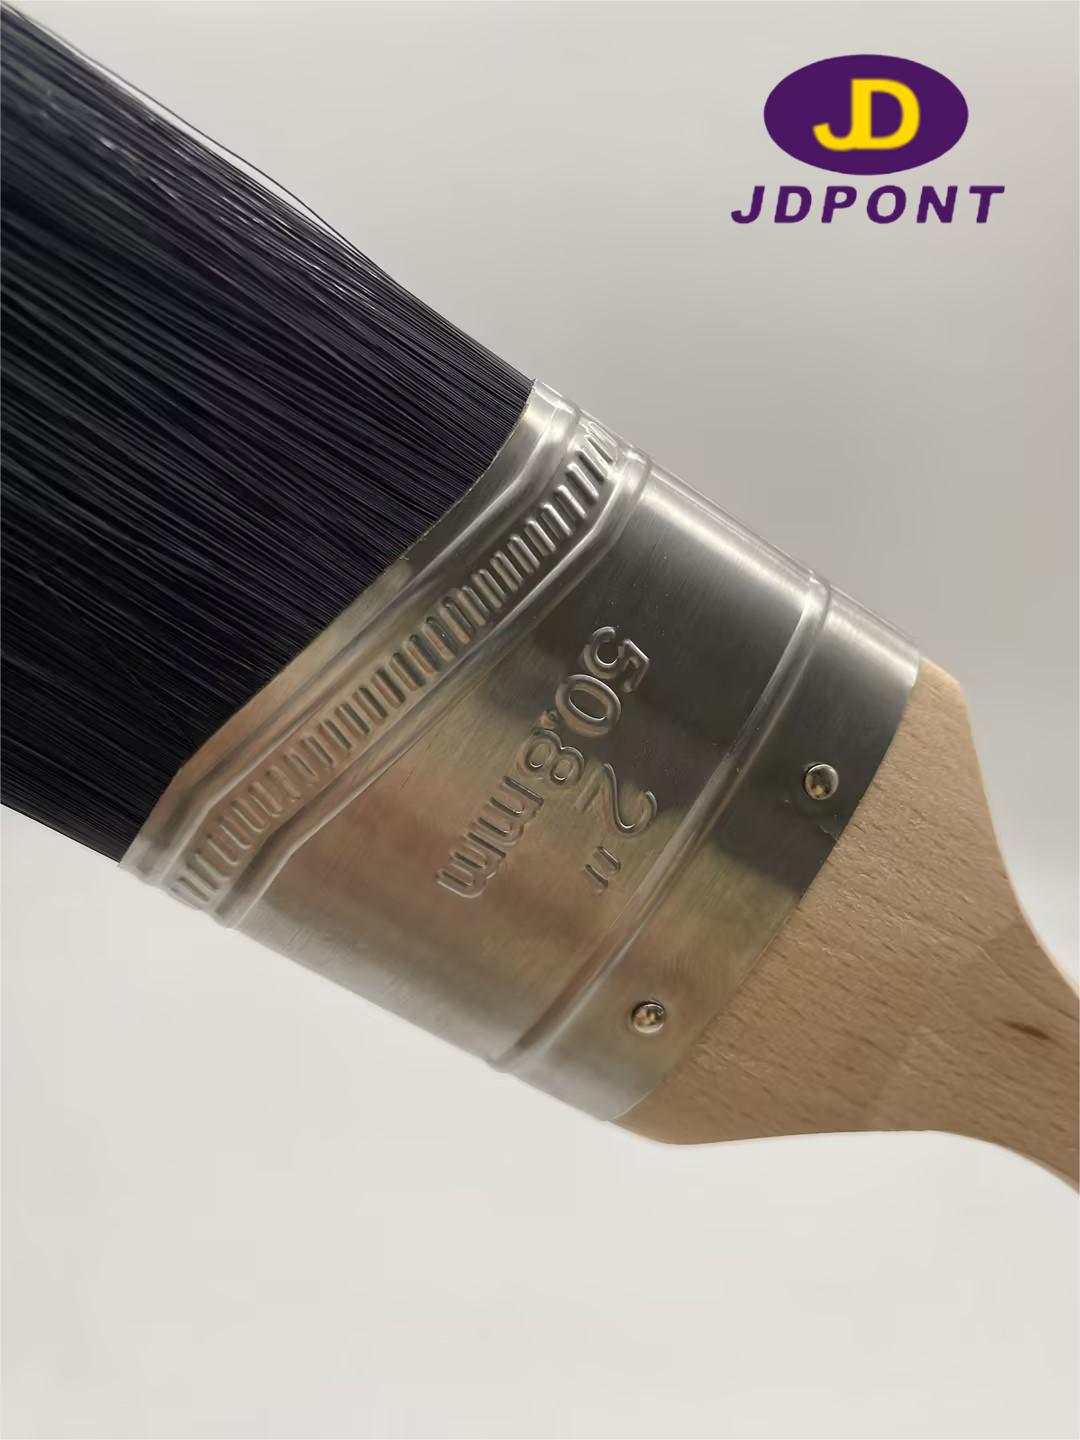 6 PRO-PA JDPBS 2 Wood Handle and 100% Synthetic Filament(Soild Round Tapered) Paint Brush(图3)